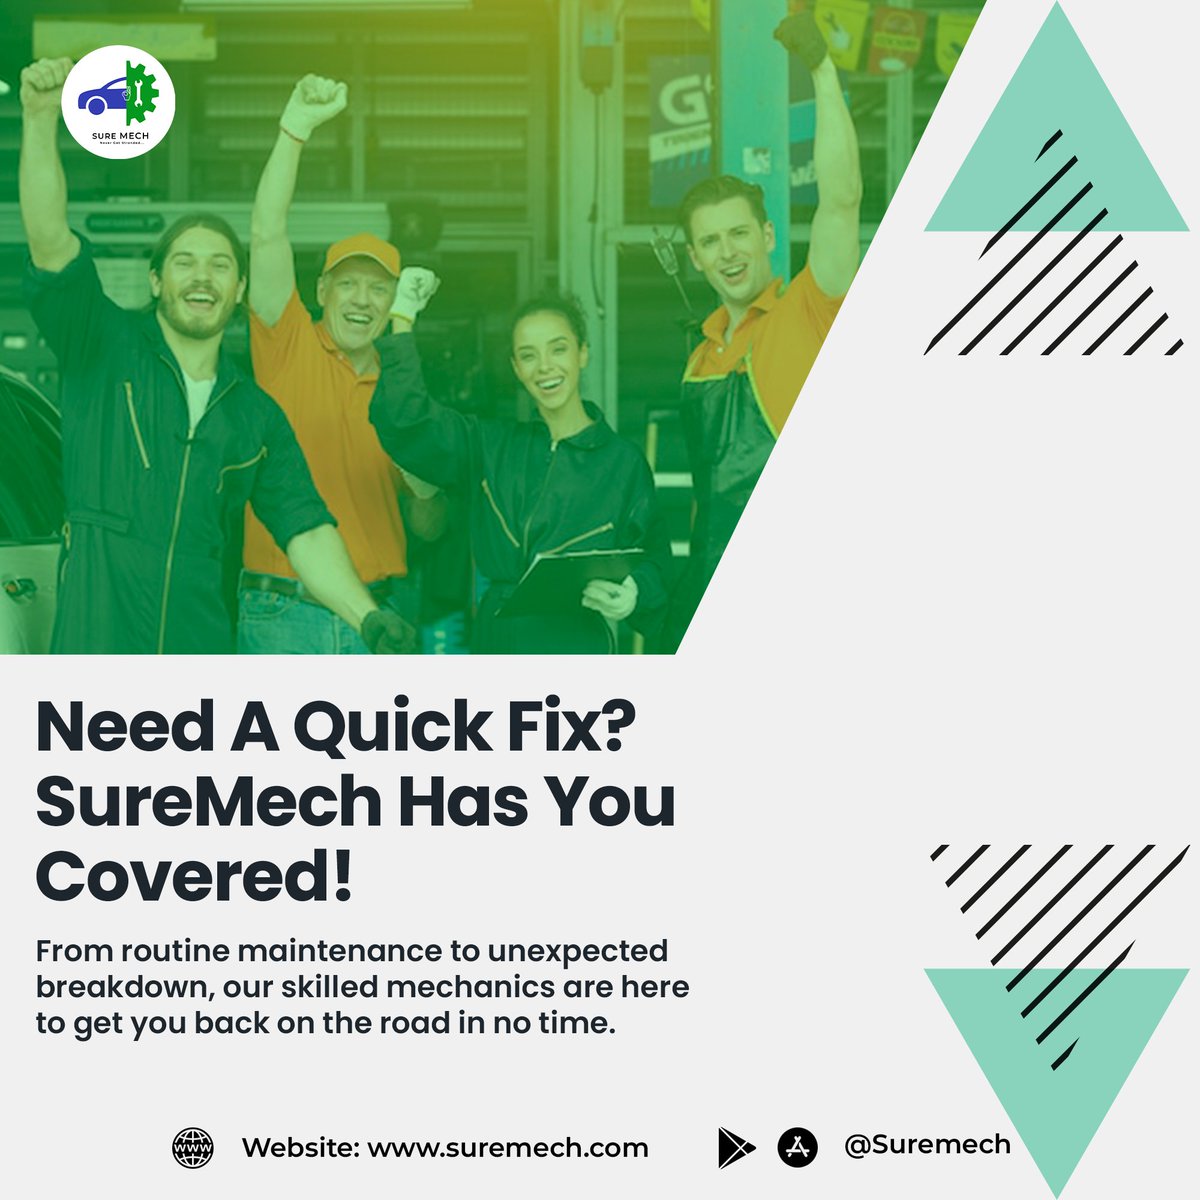 Get a Quick Fix with Sure Mech! 🚗💨 From routine maintenance to unexpected breakdowns, our skilled mechanics have you covered. Drive worry-free and trust Sure Mech for swift, reliable service wherever you are. 🛠️✨ #suremech #carcare #ondemandservices